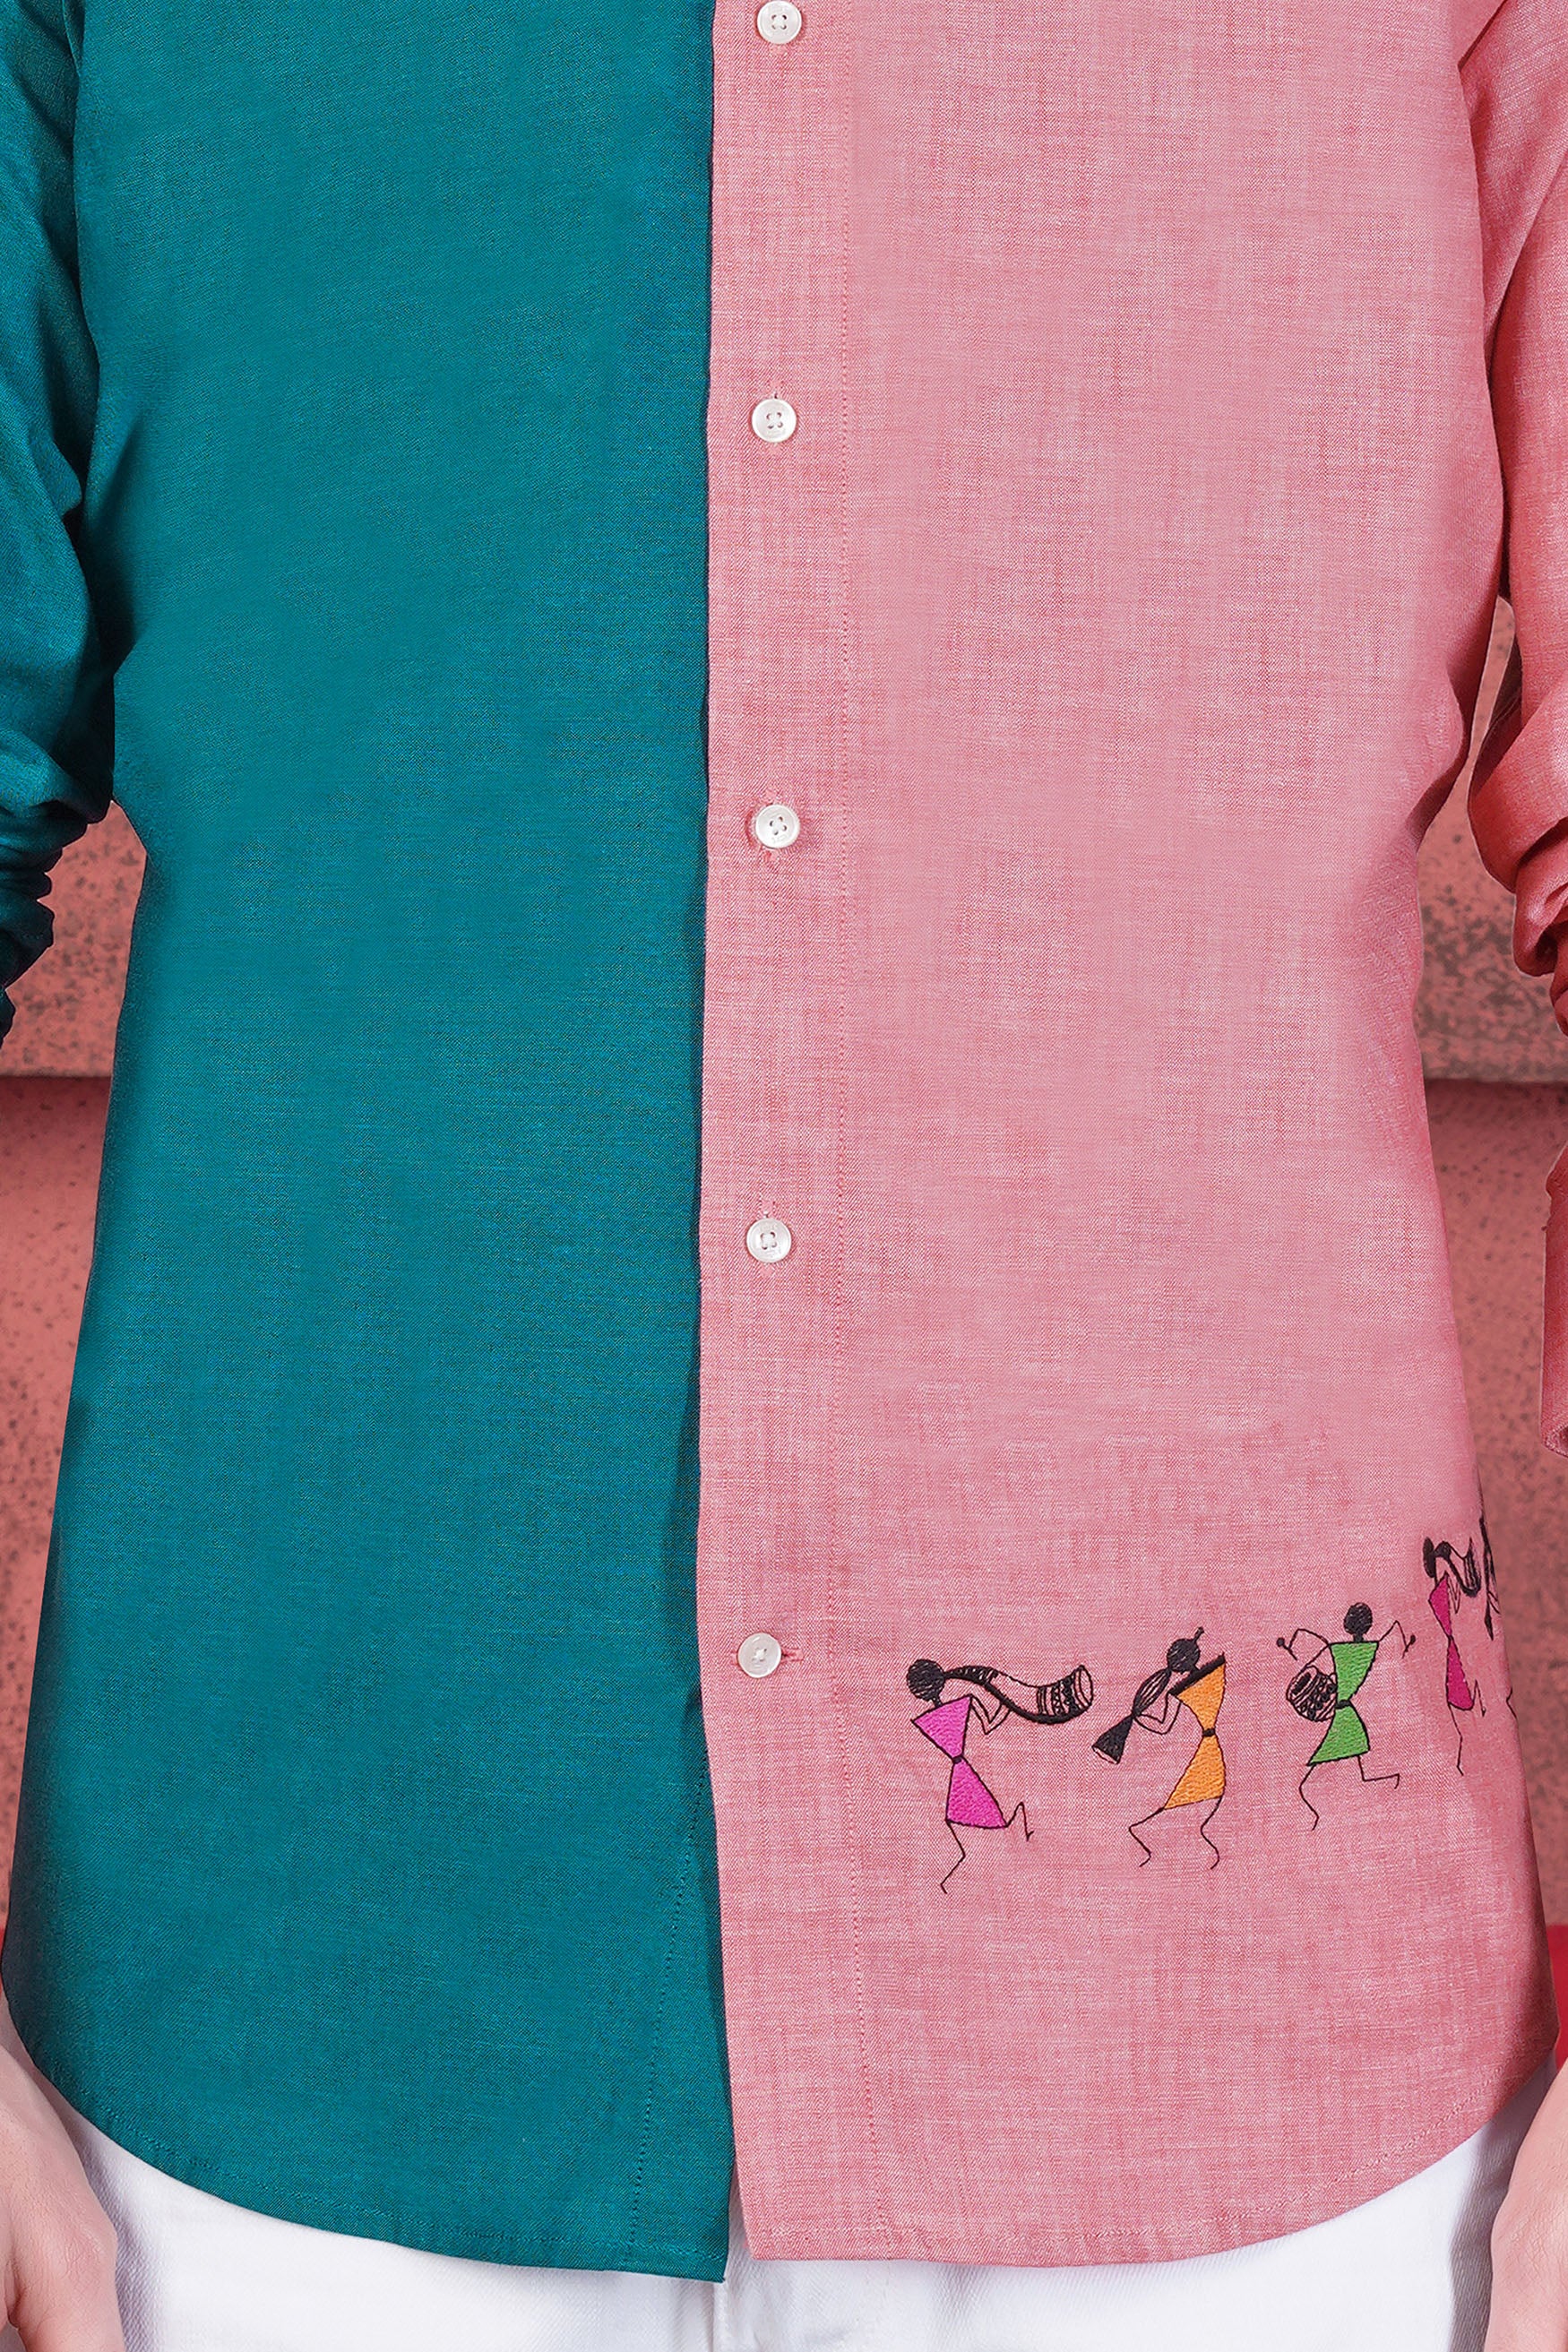 Sherpa Blue and Sunglo Pink Tribal Embroidered Royal Oxford Designer Shirt